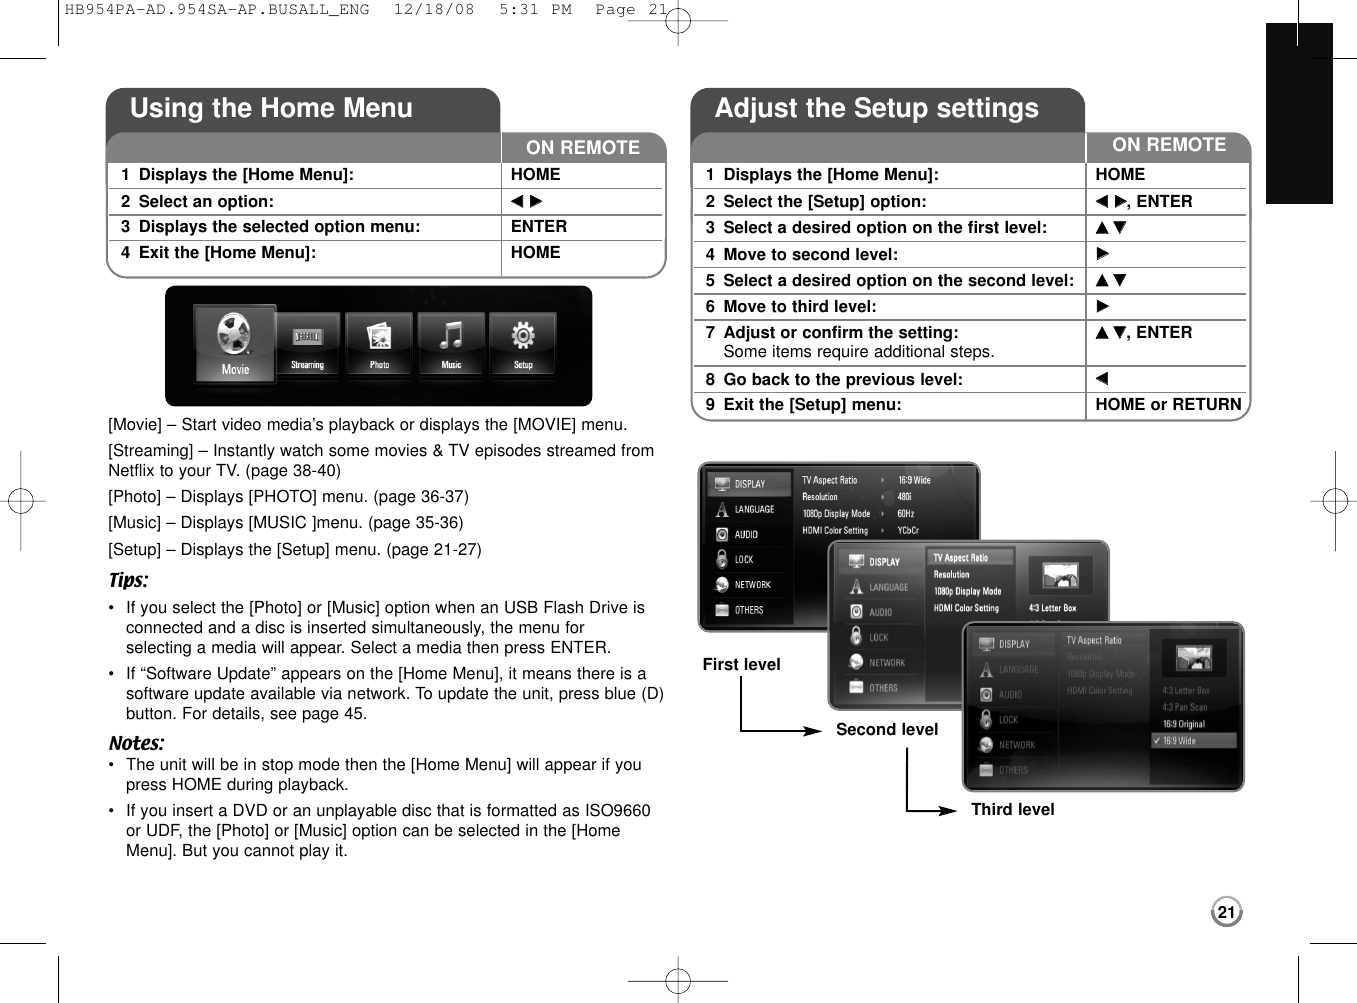 21[Movie] – Start video media’s playback or displays the [MOVIE] menu.[Streaming] – Instantly watch some movies &amp; TV episodes streamed fromNetflix to your TV. (page 38-40)[Photo] – Displays [PHOTO] menu. (page 36-37)[Music] – Displays [MUSIC ]menu. (page 35-36)[Setup] – Displays the [Setup] menu. (page 21-27)Tips:•If you select the [Photo] or [Music] option when an USB Flash Drive isconnected and a disc is inserted simultaneously, the menu for selecting a media will appear. Select a media then press ENTER.•If “Software Update” appears on the [Home Menu], it means there is asoftware update available via network. To update the unit, press blue (D)button. For details, see page 45.Notes:•The unit will be in stop mode then the [Home Menu] will appear if youpress HOME during playback.•If you insert a DVD or an unplayable disc that is formatted as ISO9660or UDF, the [Photo] or [Music] option can be selected in the [HomeMenu]. But you cannot play it.Using the Home Menu1Displays the [Home Menu]: HOME2Select an option:  bbBB3Displays the selected option menu: ENTER4Exit the [Home Menu]:  HOMEON REMOTEAdjust the Setup settings1Displays the [Home Menu]: HOME2Select the [Setup] option:  bbBB, ENTER3Select a desired option on the first level:  vv  VV4Move to second level:  BB5Select a desired option on the second level:  vv  VV6Move to third level:  BB7Adjust or confirm the setting: vv  VV, ENTERSome items require additional steps.8Go back to the previous level: bb9Exit the [Setup] menu: HOME or RETURNON REMOTEFirst levelSecond levelThird levelHB954PA-AD.954SA-AP.BUSALL_ENG  12/18/08  5:31 PM  Page 21